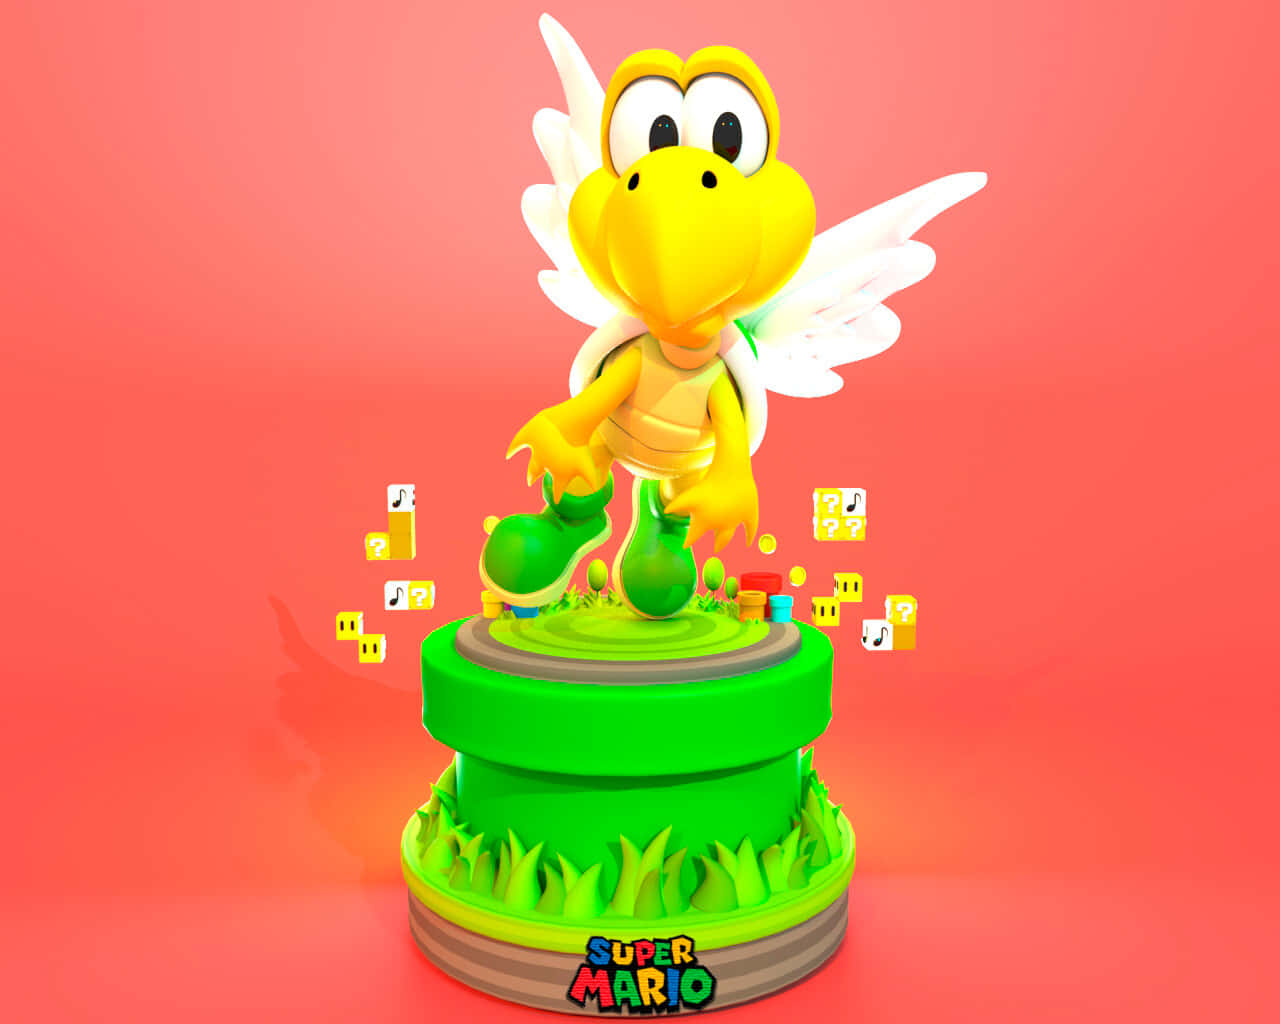 Koopa Troopa Stands Tall in Colorful World Wallpaper